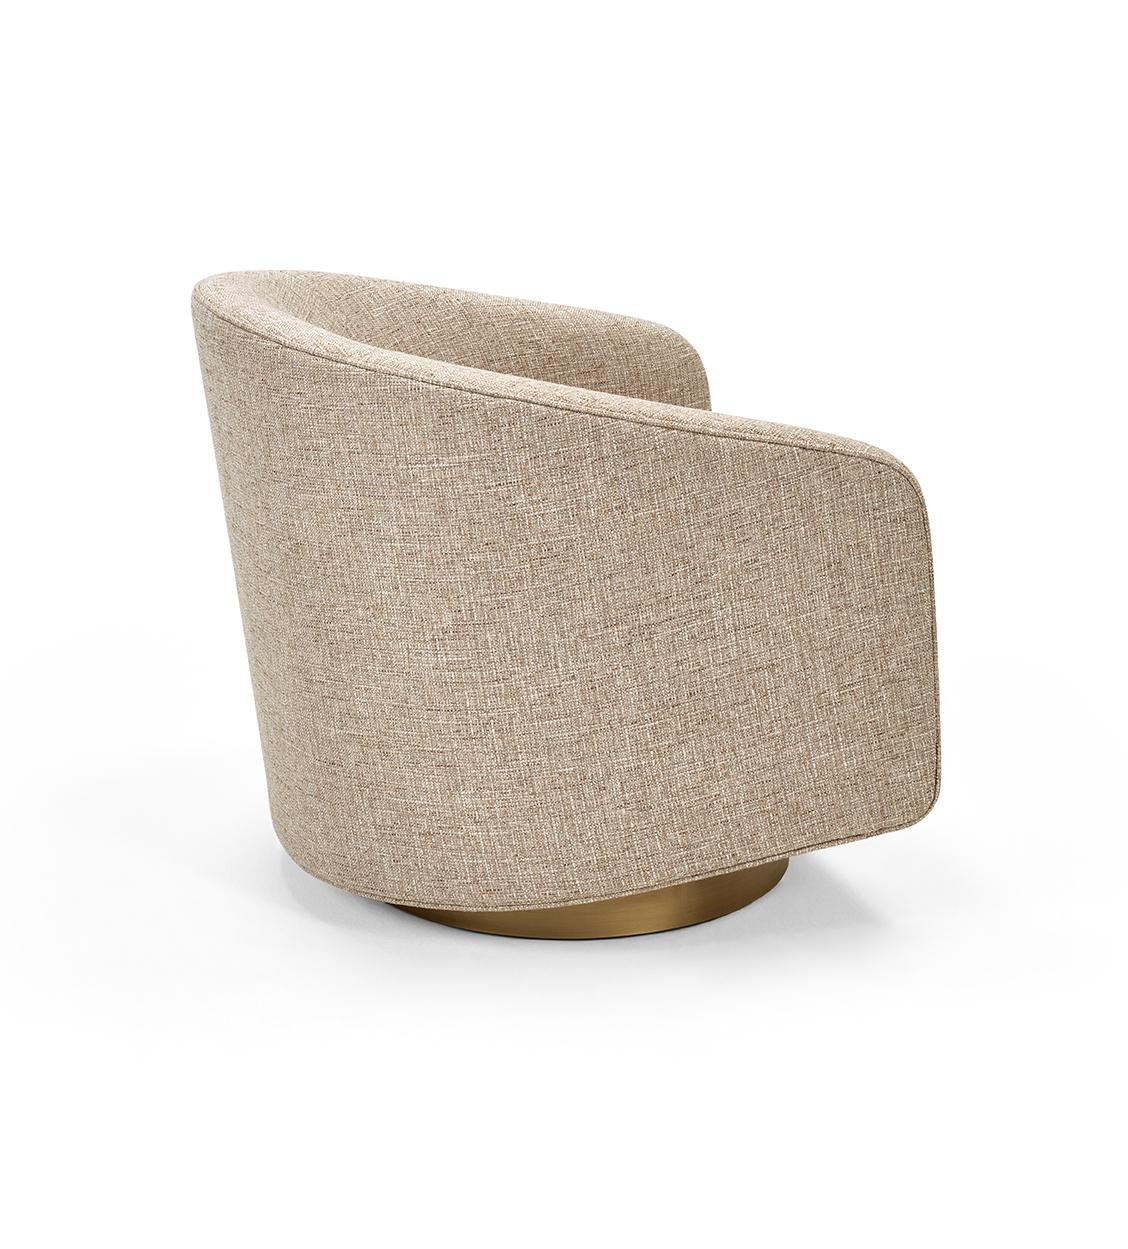 BOEMIA, a swivel fabric armchair with armrest, is the balance between the elegance and the comfort. With an embrassing back structure, is settled on a refined swivel base in antique brass color. Available in a wide range of fabrics or natural